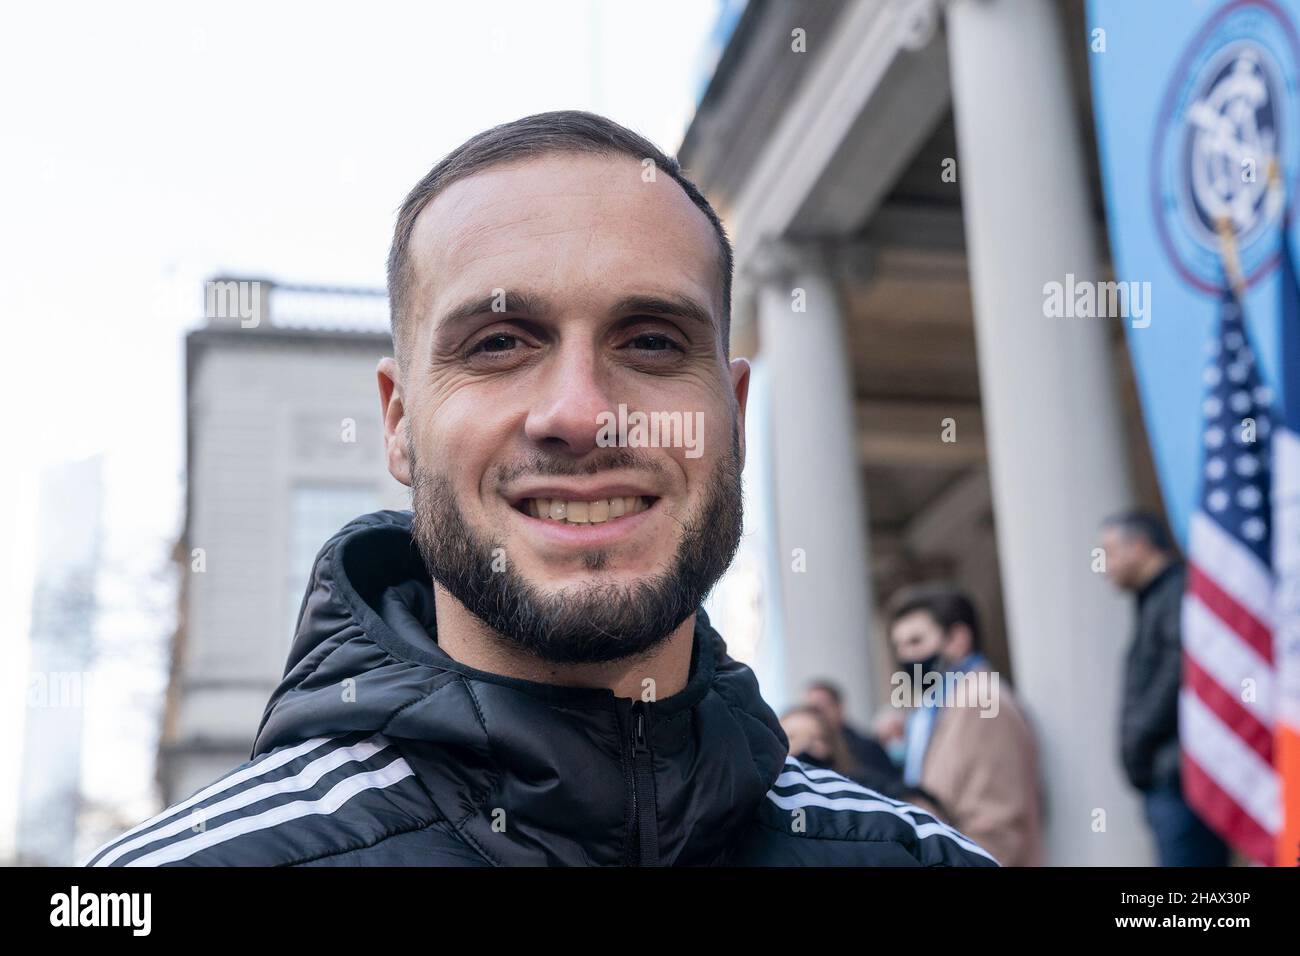 New York, New York, USA. 14th Dec, 2021. Defender Maxime Chanot poses during celebration for NYCFC winning the 2021 MLS Cup on City Hall steps. NYCFC finished the regular season in 4th place and played almost all playoff games away. Winning the MLS Cup is the first trophy won by the franchise since it was established 7 years ago. NYCFC is part of the City Football Group which owns football clubs around the world. Sean Johnson was named MVP of the playofffs. (Credit Image: © Lev Radin/Pacific Press via ZUMA Press Wire) Stock Photo